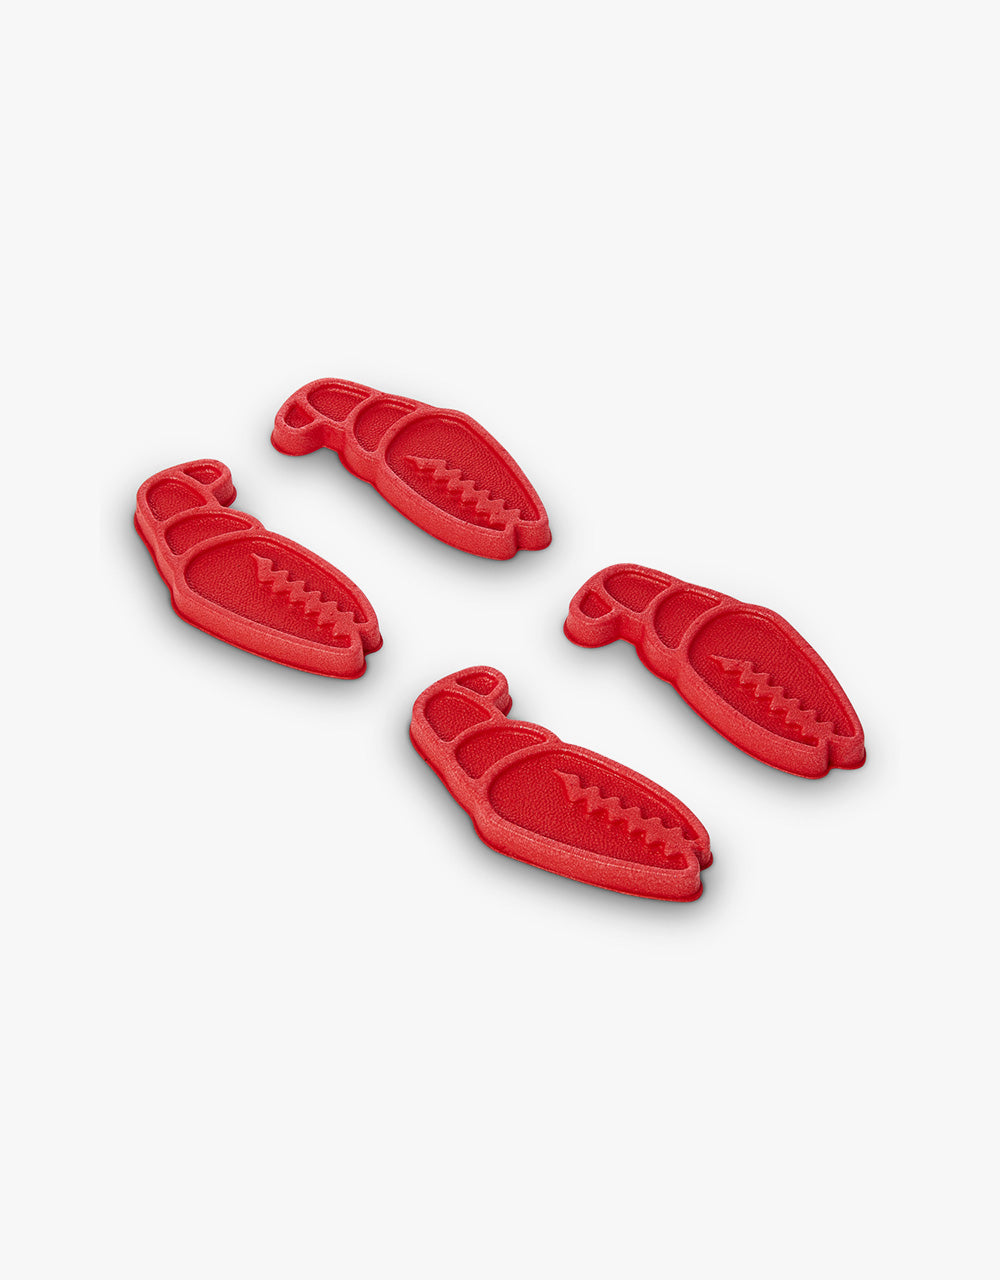 Crab Grab Mini Claws Snowboard Traction - Red